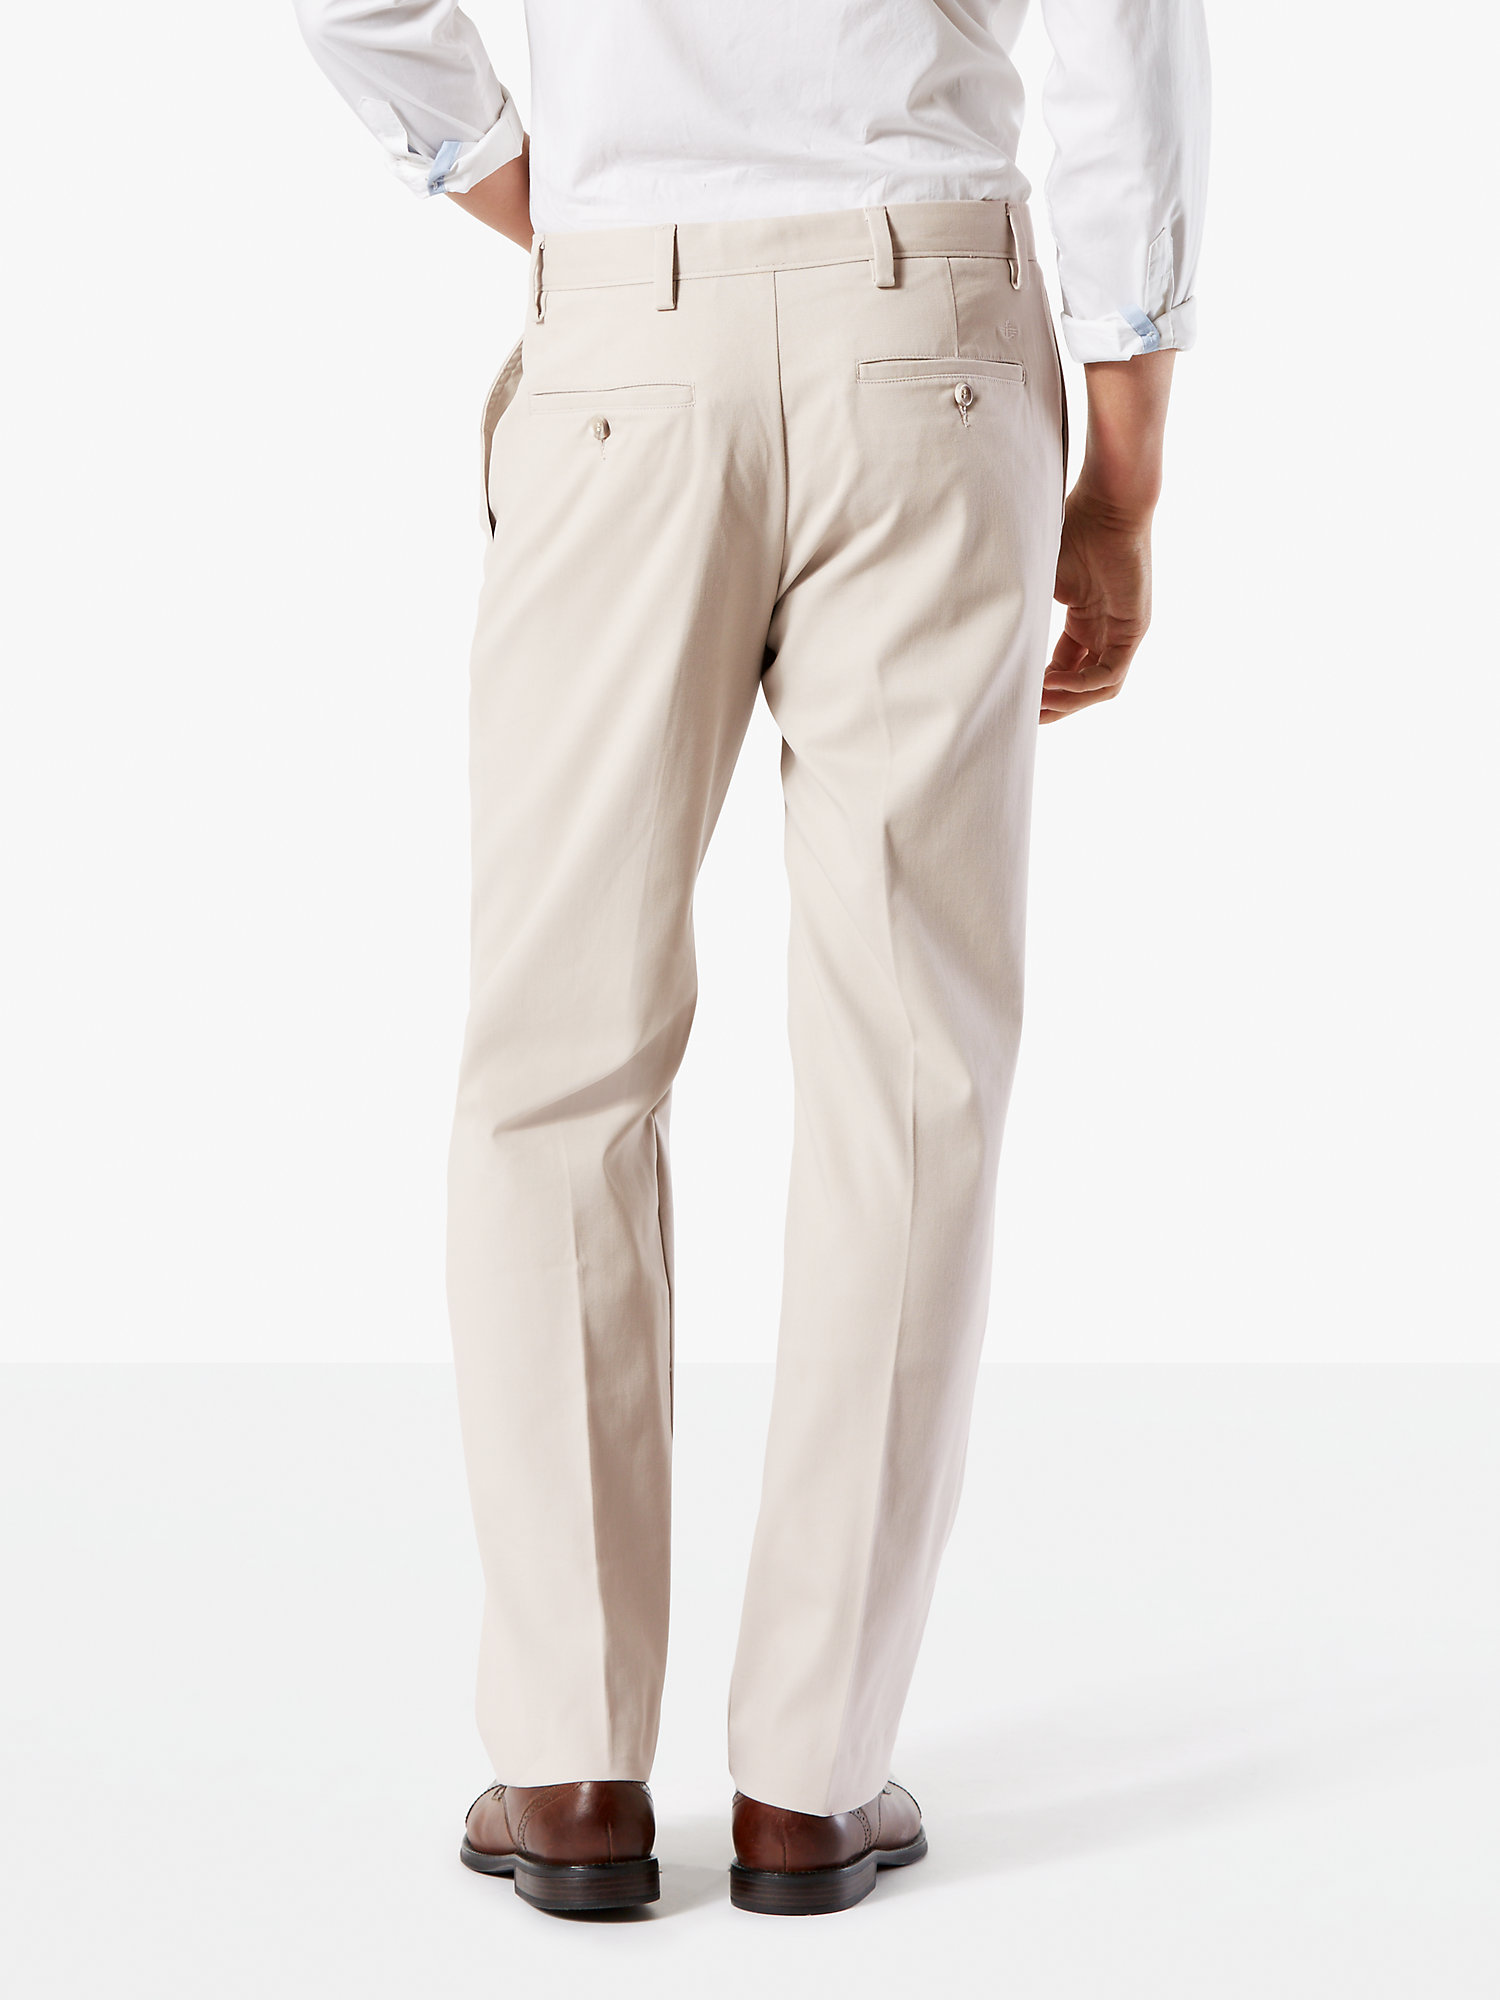 Dockers Men's Classic Pleated Easy Khaki with Stretch - image 3 of 6